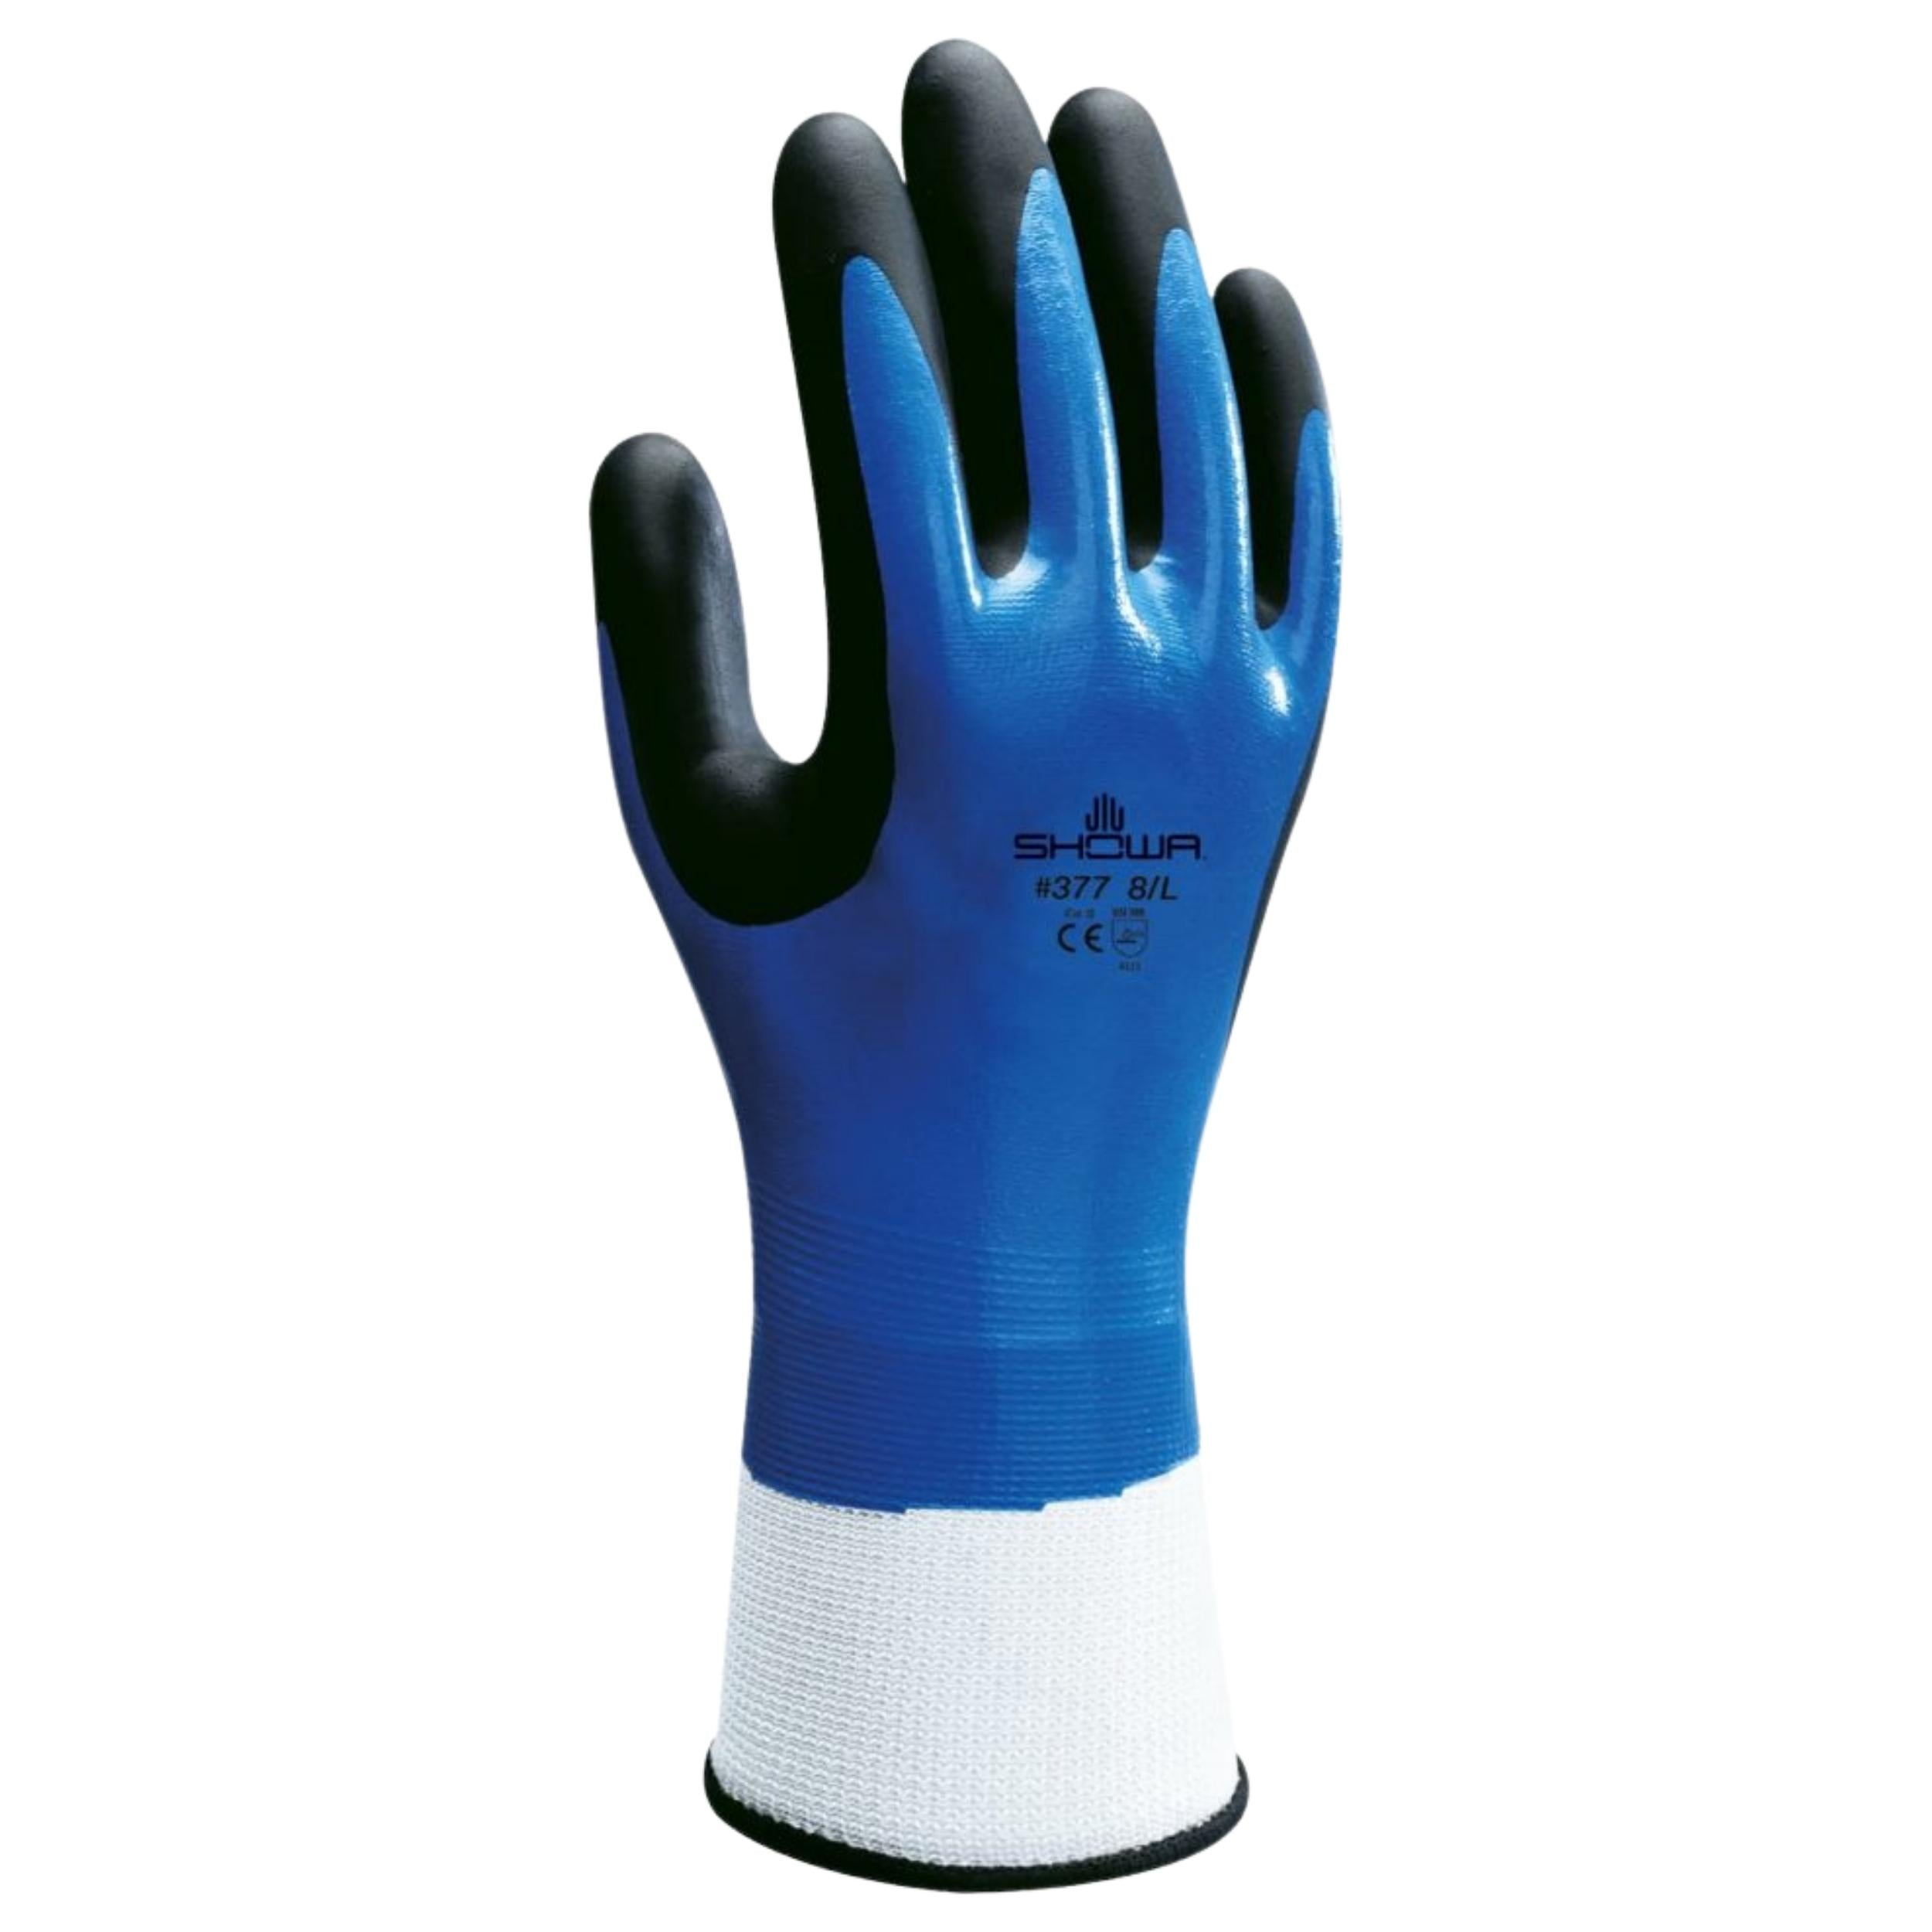 SHOWA 377: Chemical-Resistant Gloves 6 PAIR